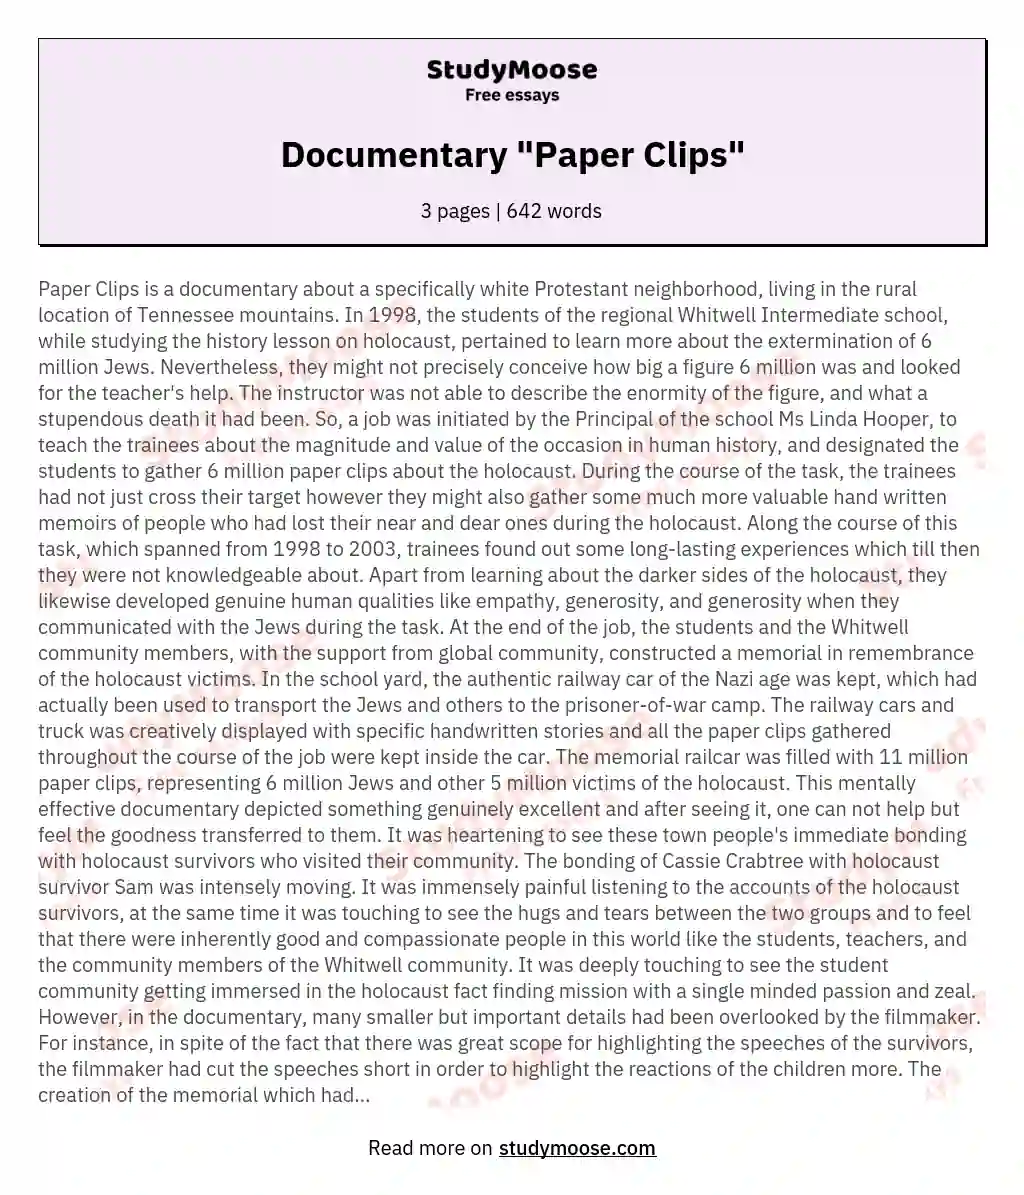 Documentary "Paper Clips" essay